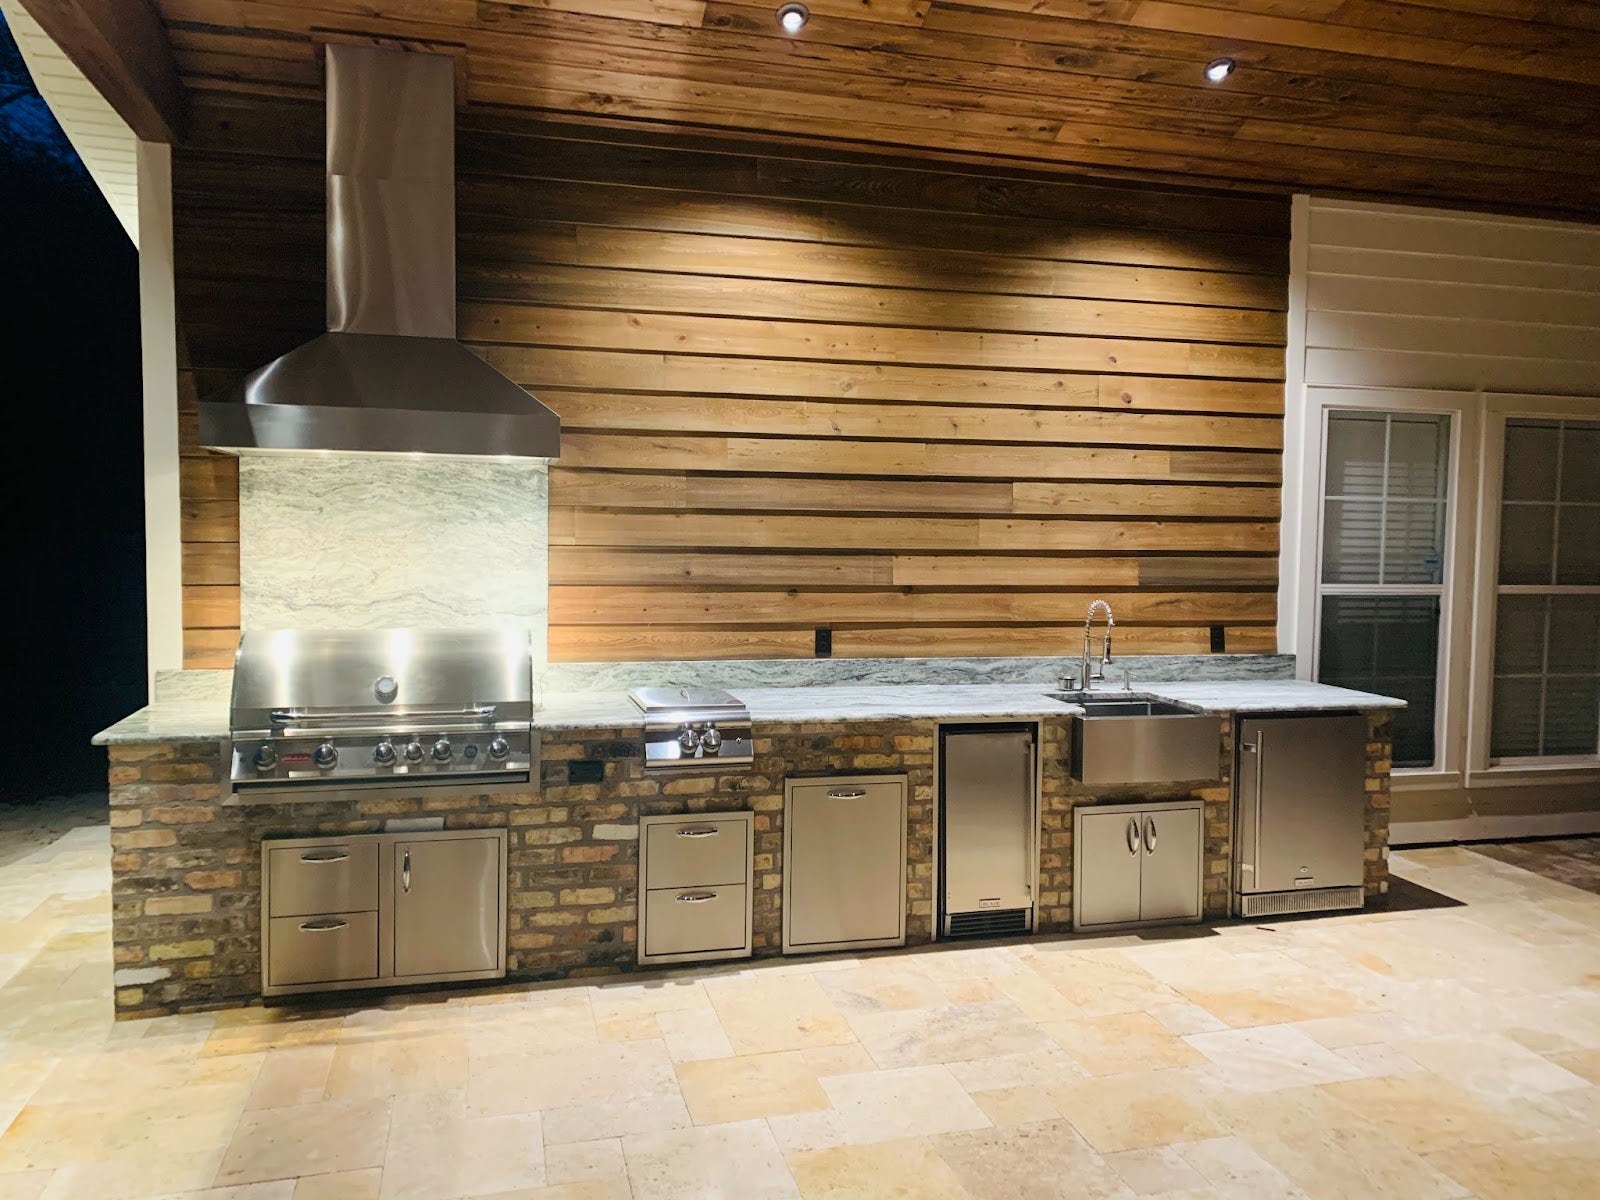 Rustic yet modern outdoor kitchen with stone counters, a Proline range hood, and a suite of stainless steel appliances under a warm wooden ceiling - prolinerangehoods.com.